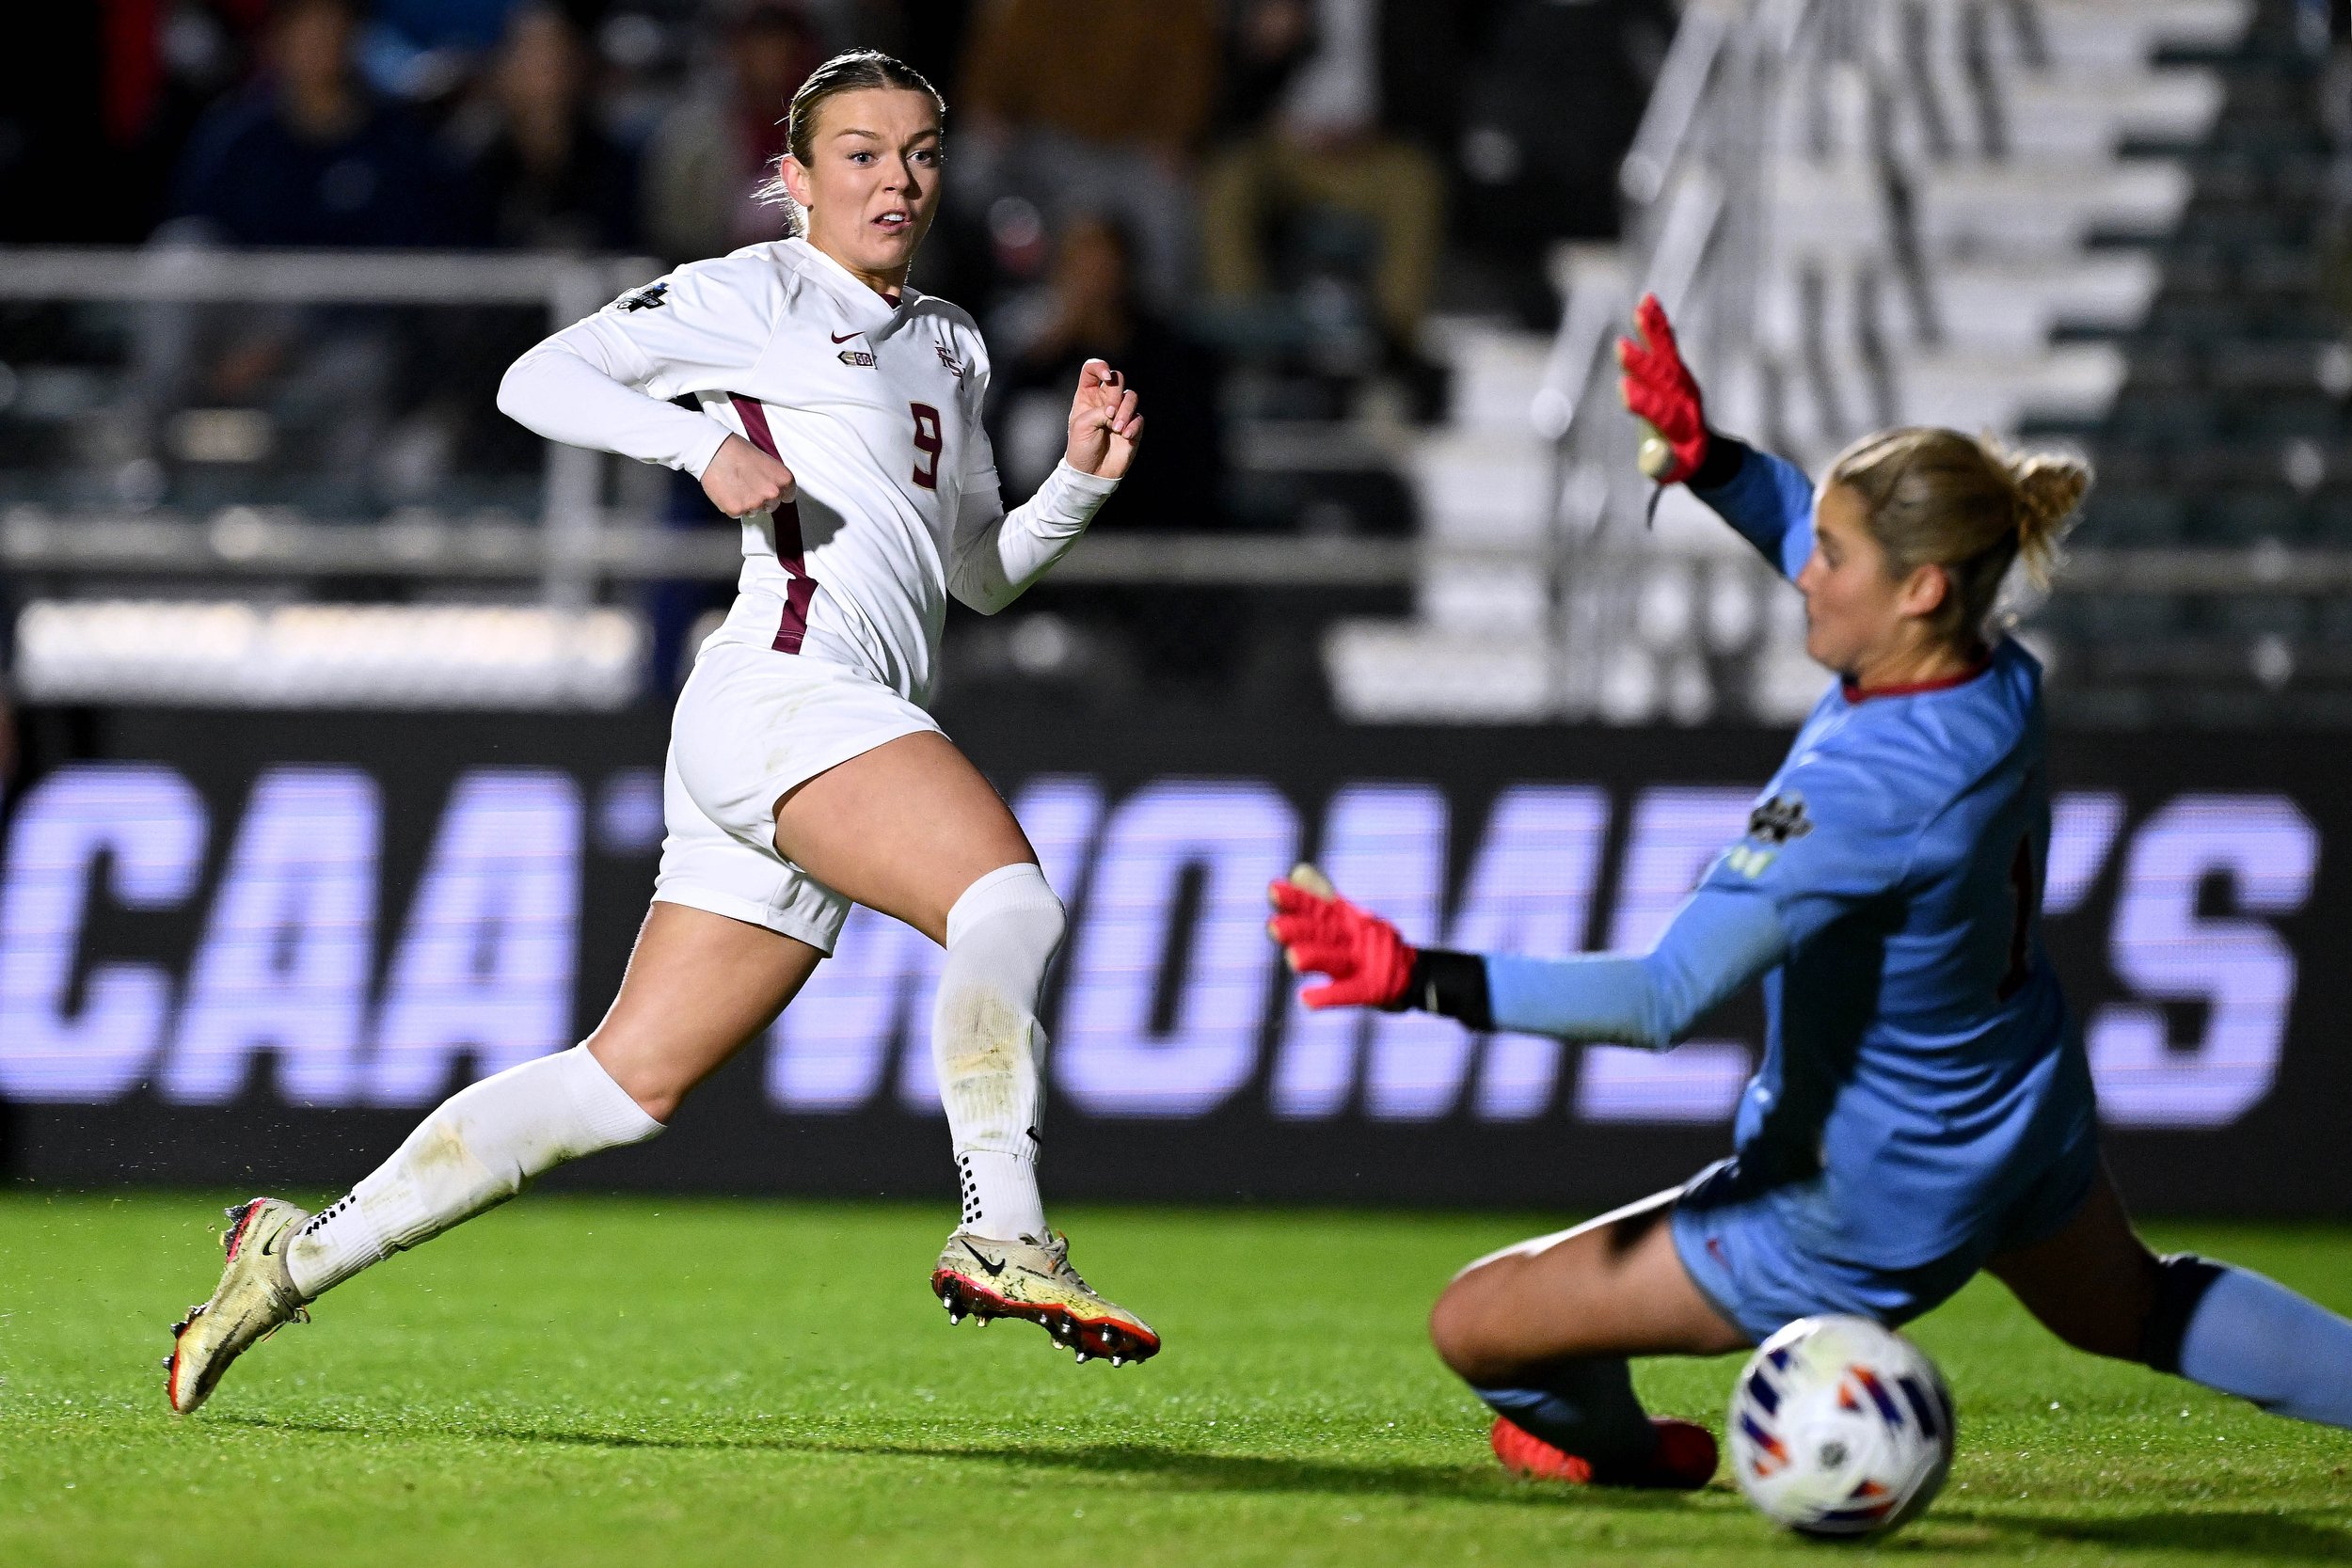  RALEIGH, NORTH CAROLINA - DECEMBER 04:  Beata Olsson #9 of the Florida St. Seminoles scores a goal against Ryan Campbell #1 of the Stanford Cardinal during the 2023 Division I Women's Soccer Championship at Wake Med Soccer Park on December 04, 2023 